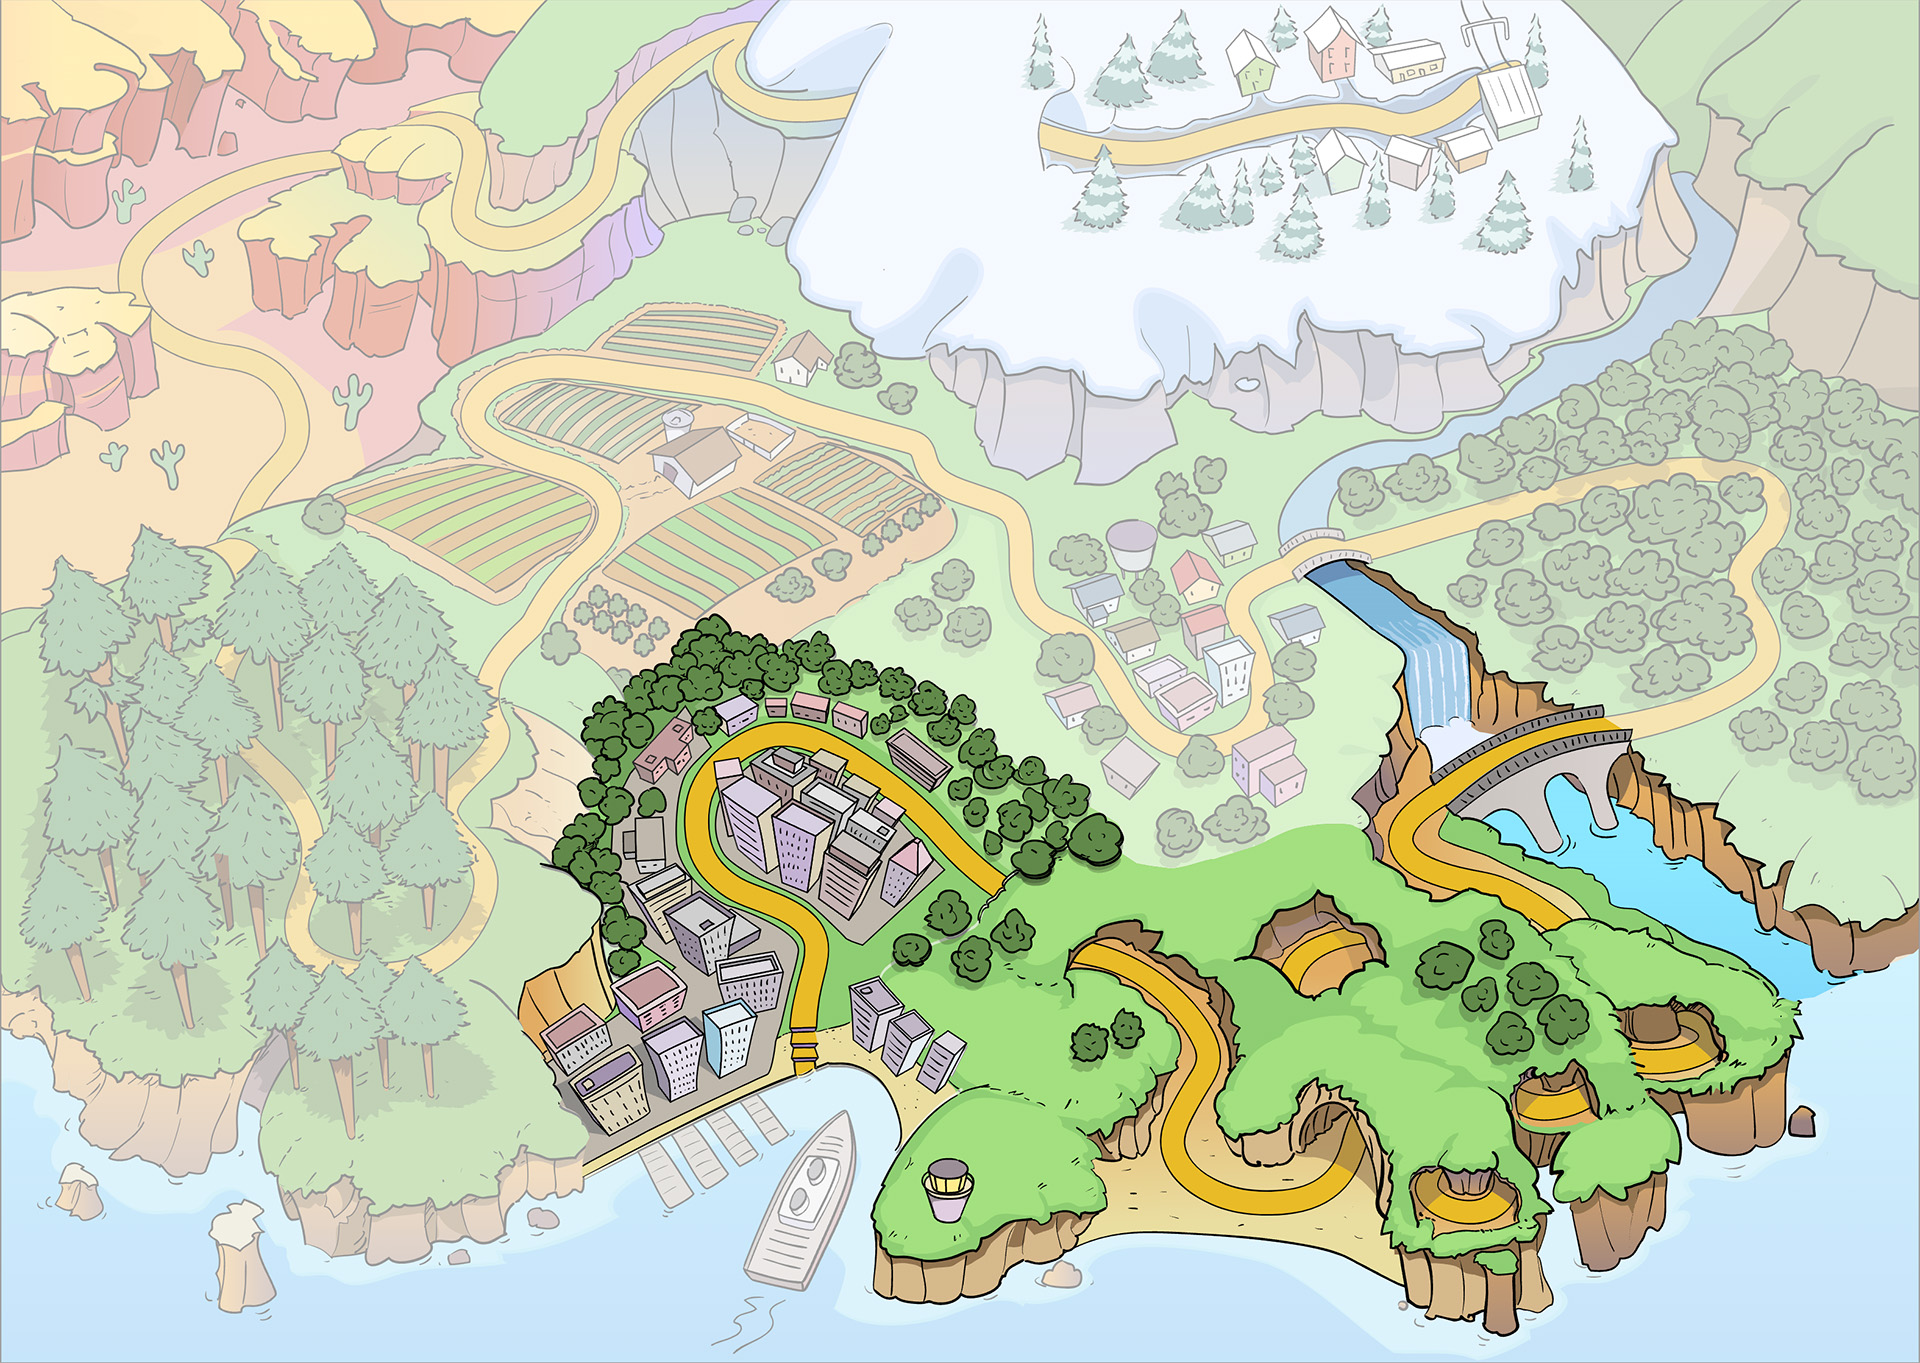 Product screenshot shows a view from the top of the map of activities students progress through. In an illustration style, the path starts in a big city by the water, progresses through a forest, crosses a bridge, winds through another forest, crosses a waterfall, enters a town, goes through a farm, enters another forest, progresses across a desert, and ends in a small mountain village. The parts of the map the student hasn’t completed yet are grayed out.